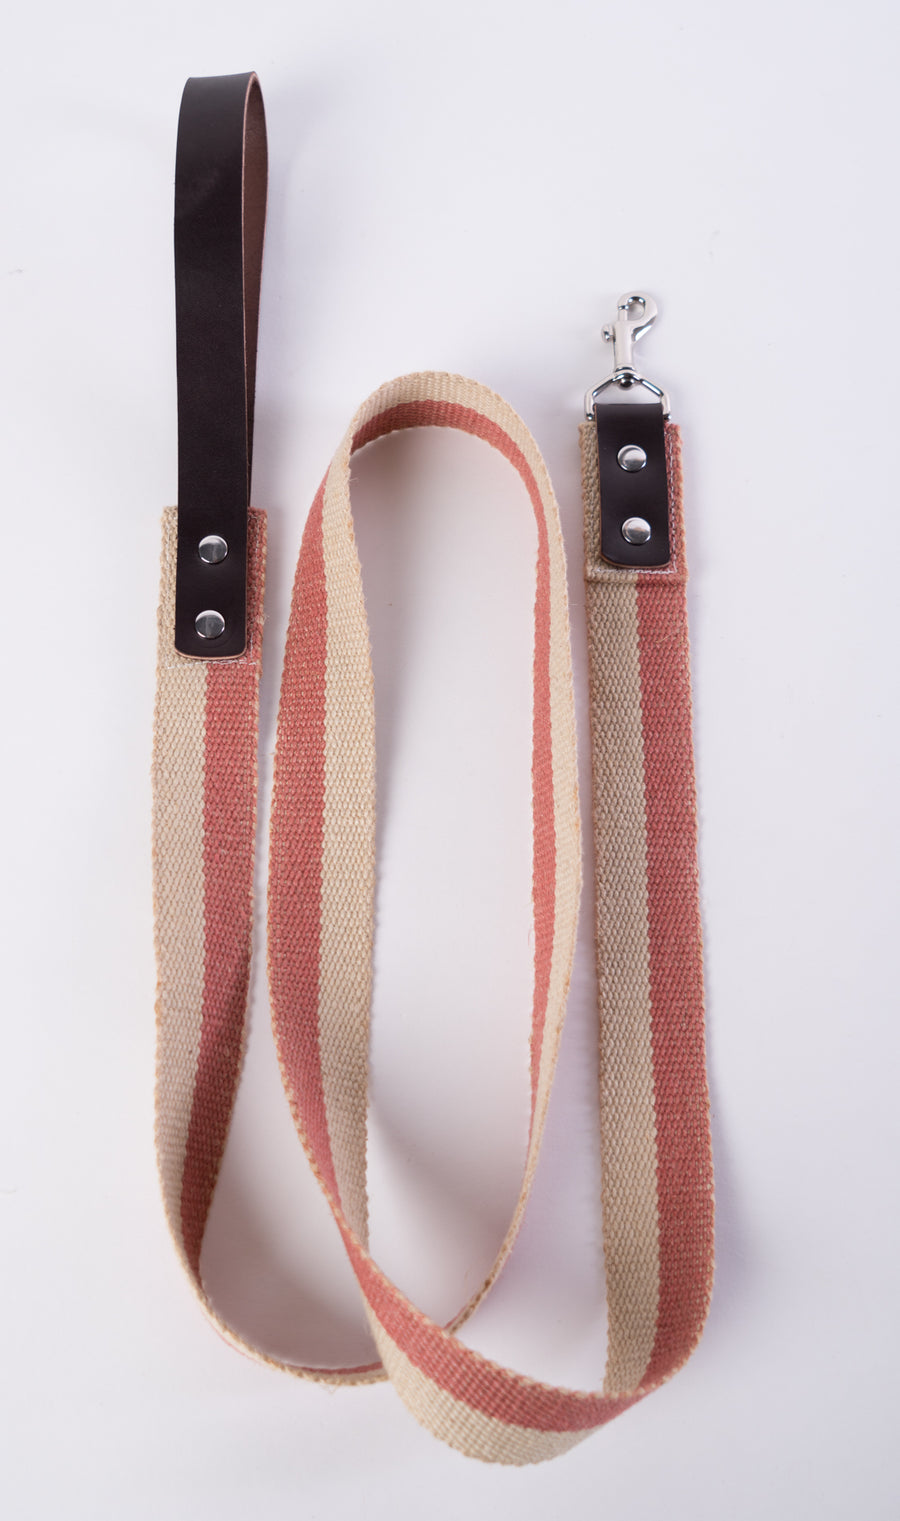 Vintage French Webbing and Leather Dog Leash - Handmade in Maine